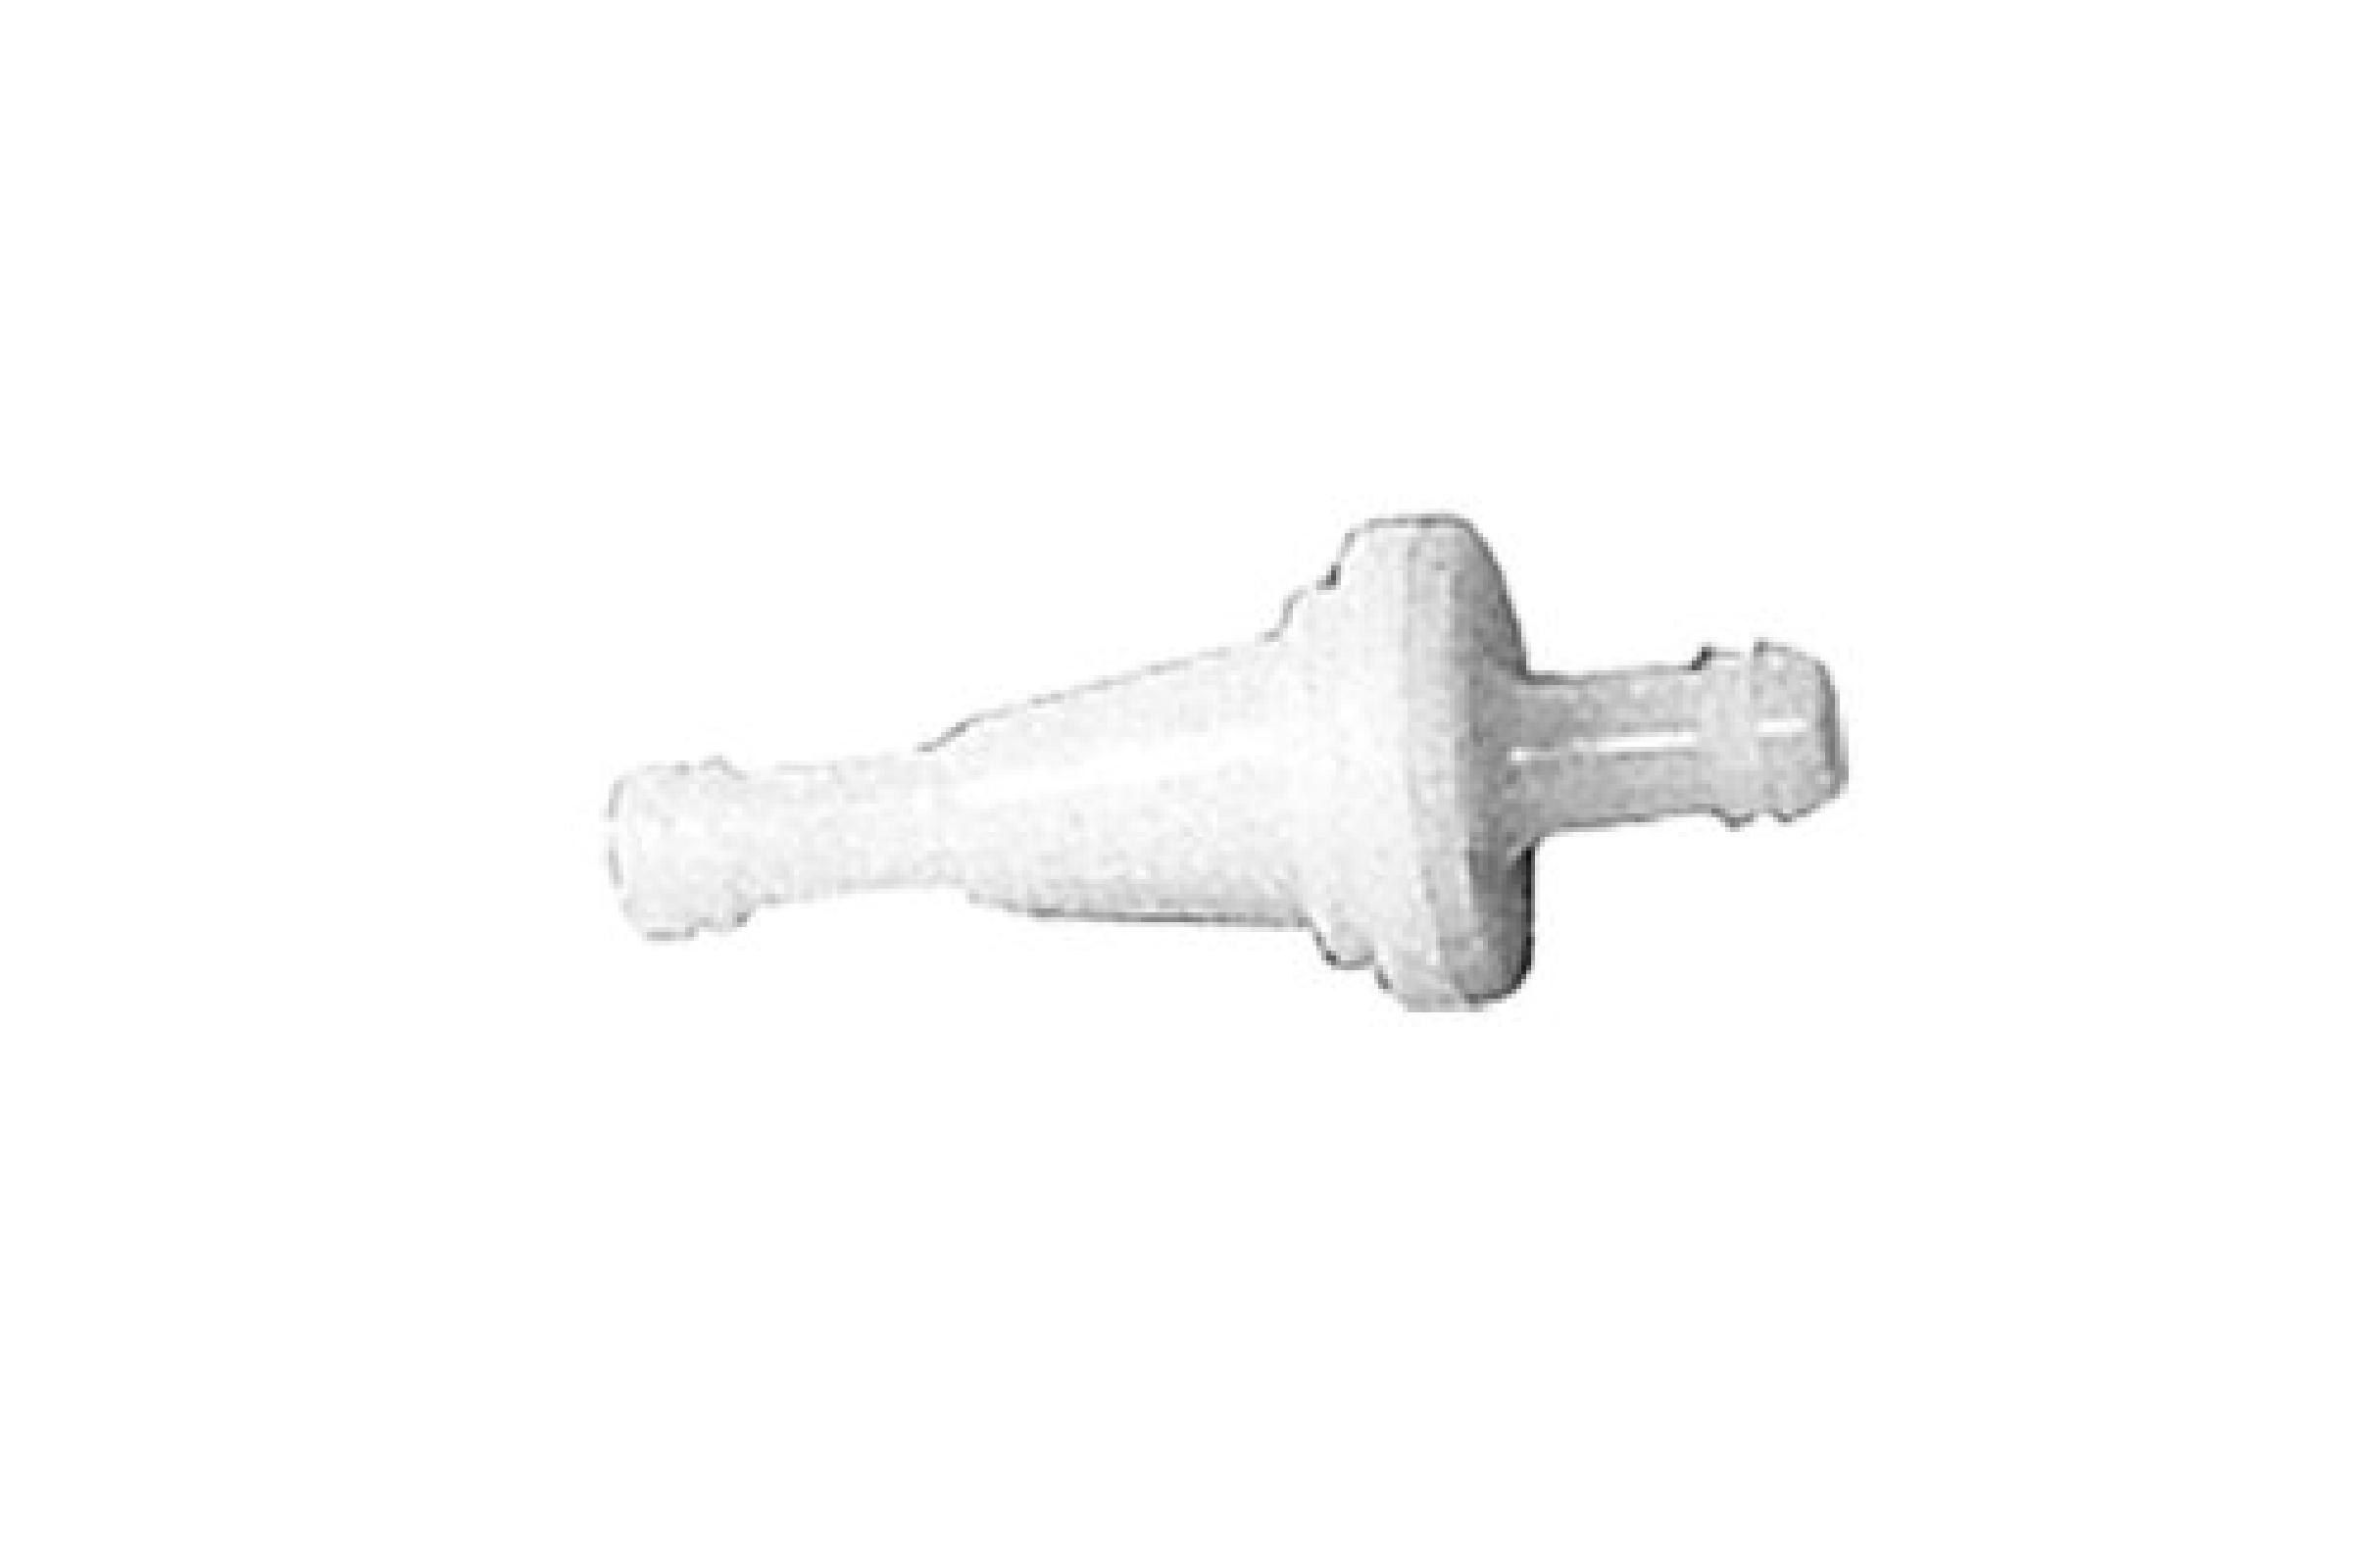 07-102 FUEL FILTER IN-LINE 75 MCRN SN part# 07-102 by Oregon